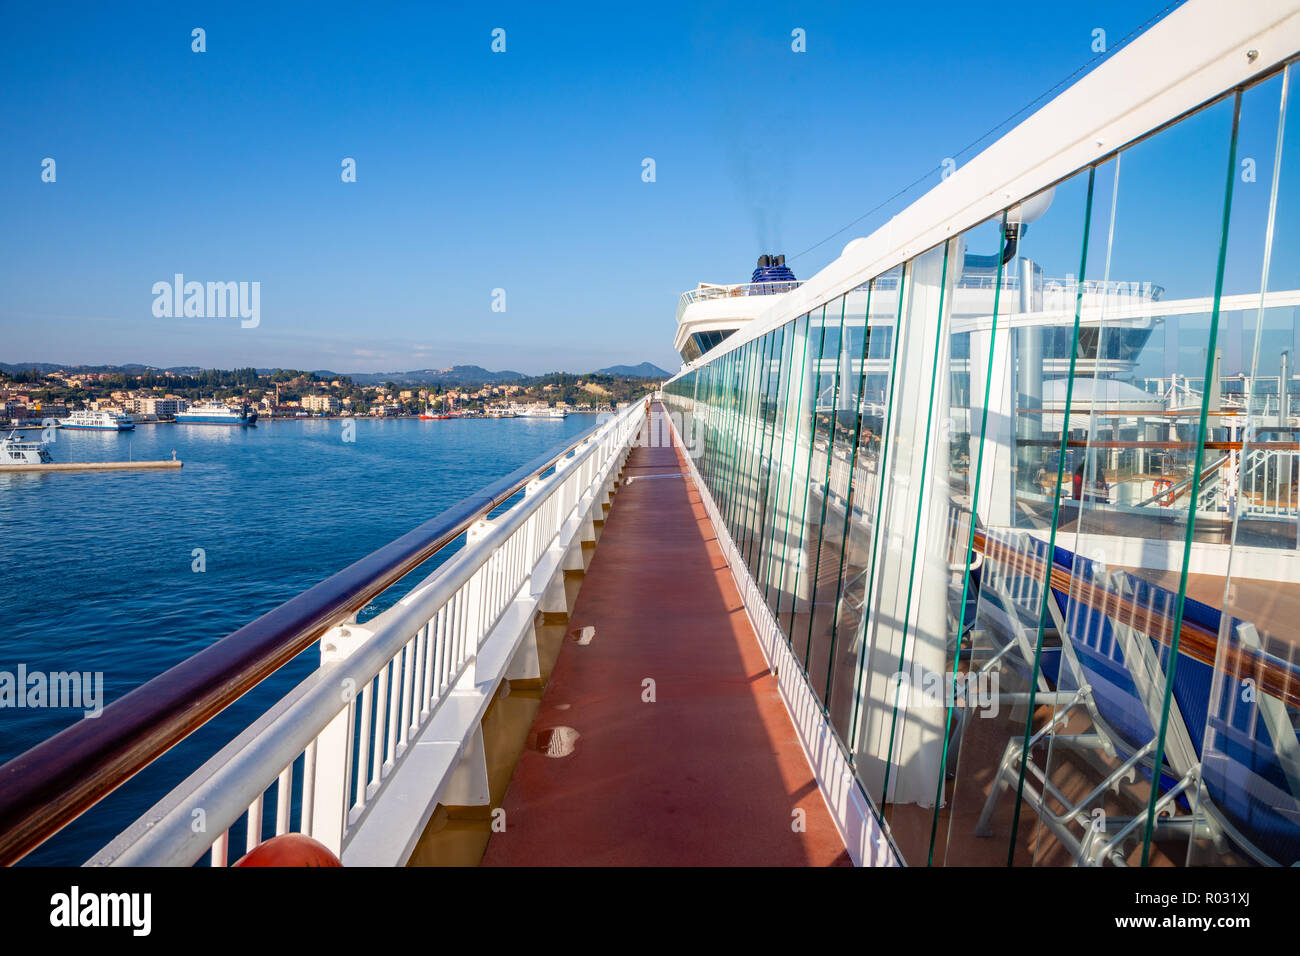 Perspective view of outdoor steel deck at a cruise ship with sea and town in the background Stock Photo